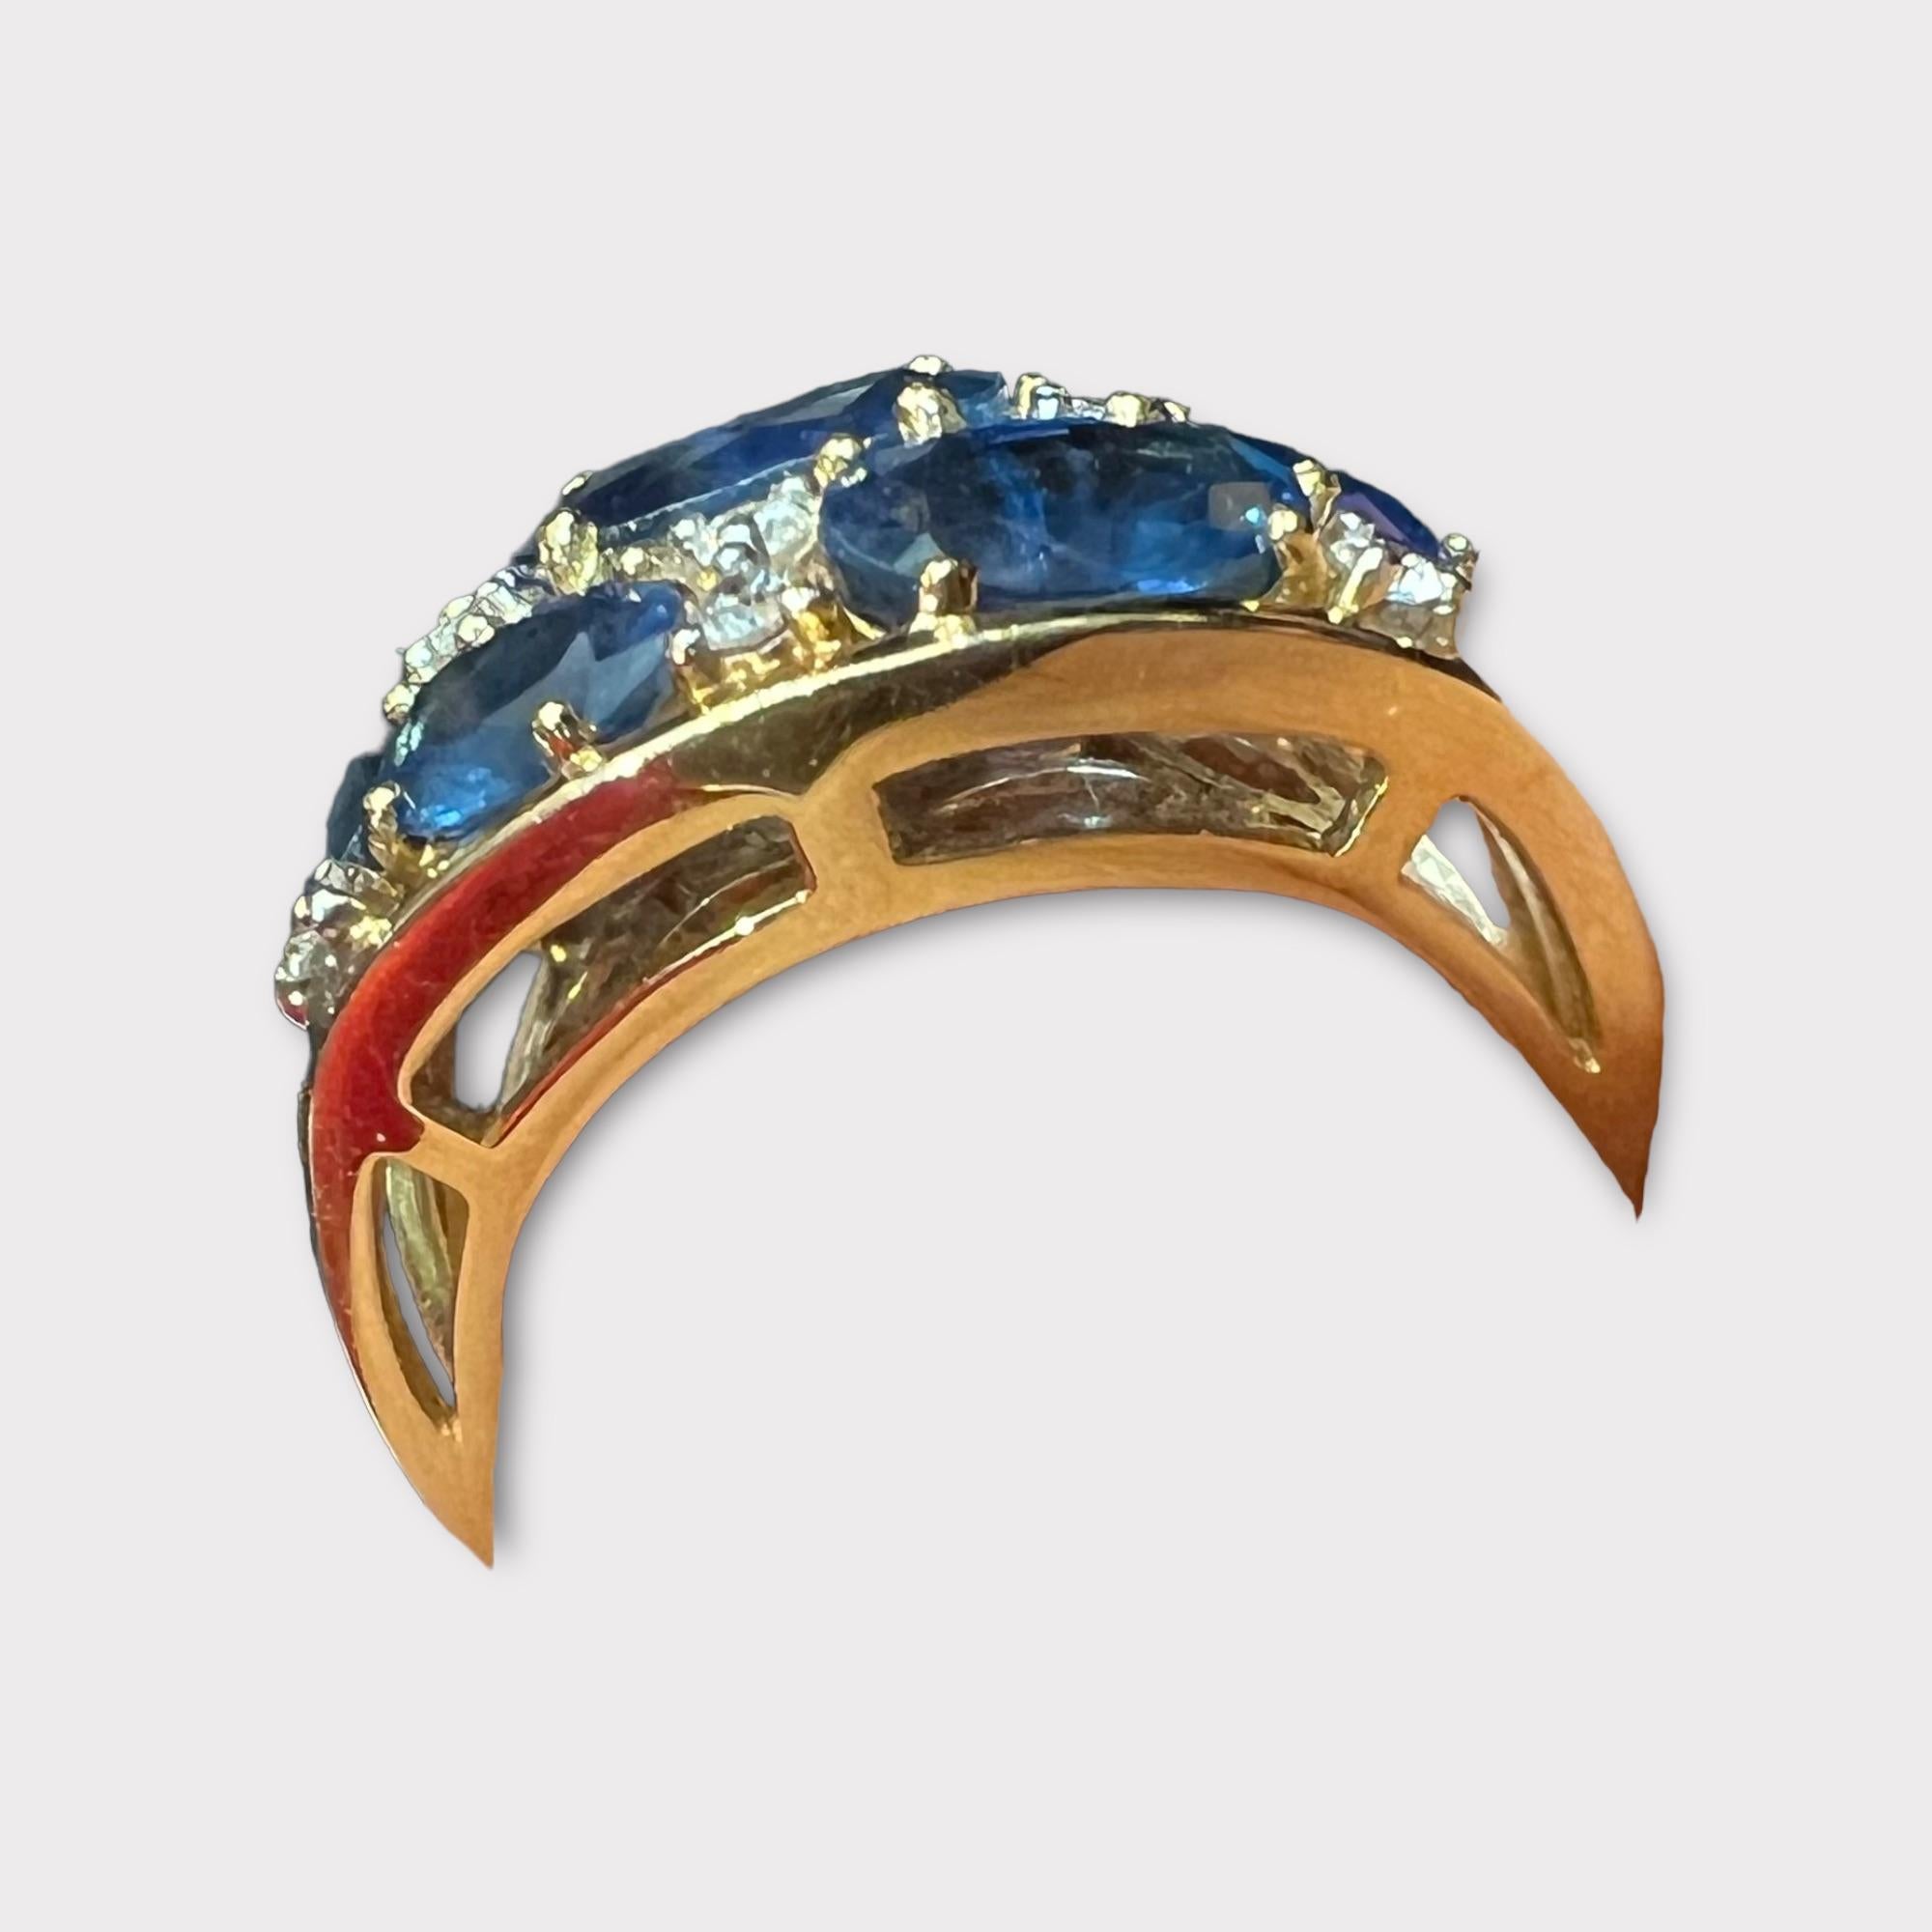  18 carat yellow gold cocktail ring , set with 7 sapphires totaling 6,19 carats, paved with 0,21 carat of brilliants
total weight of the ring: 6.94 grams
ring size: 52 or 6